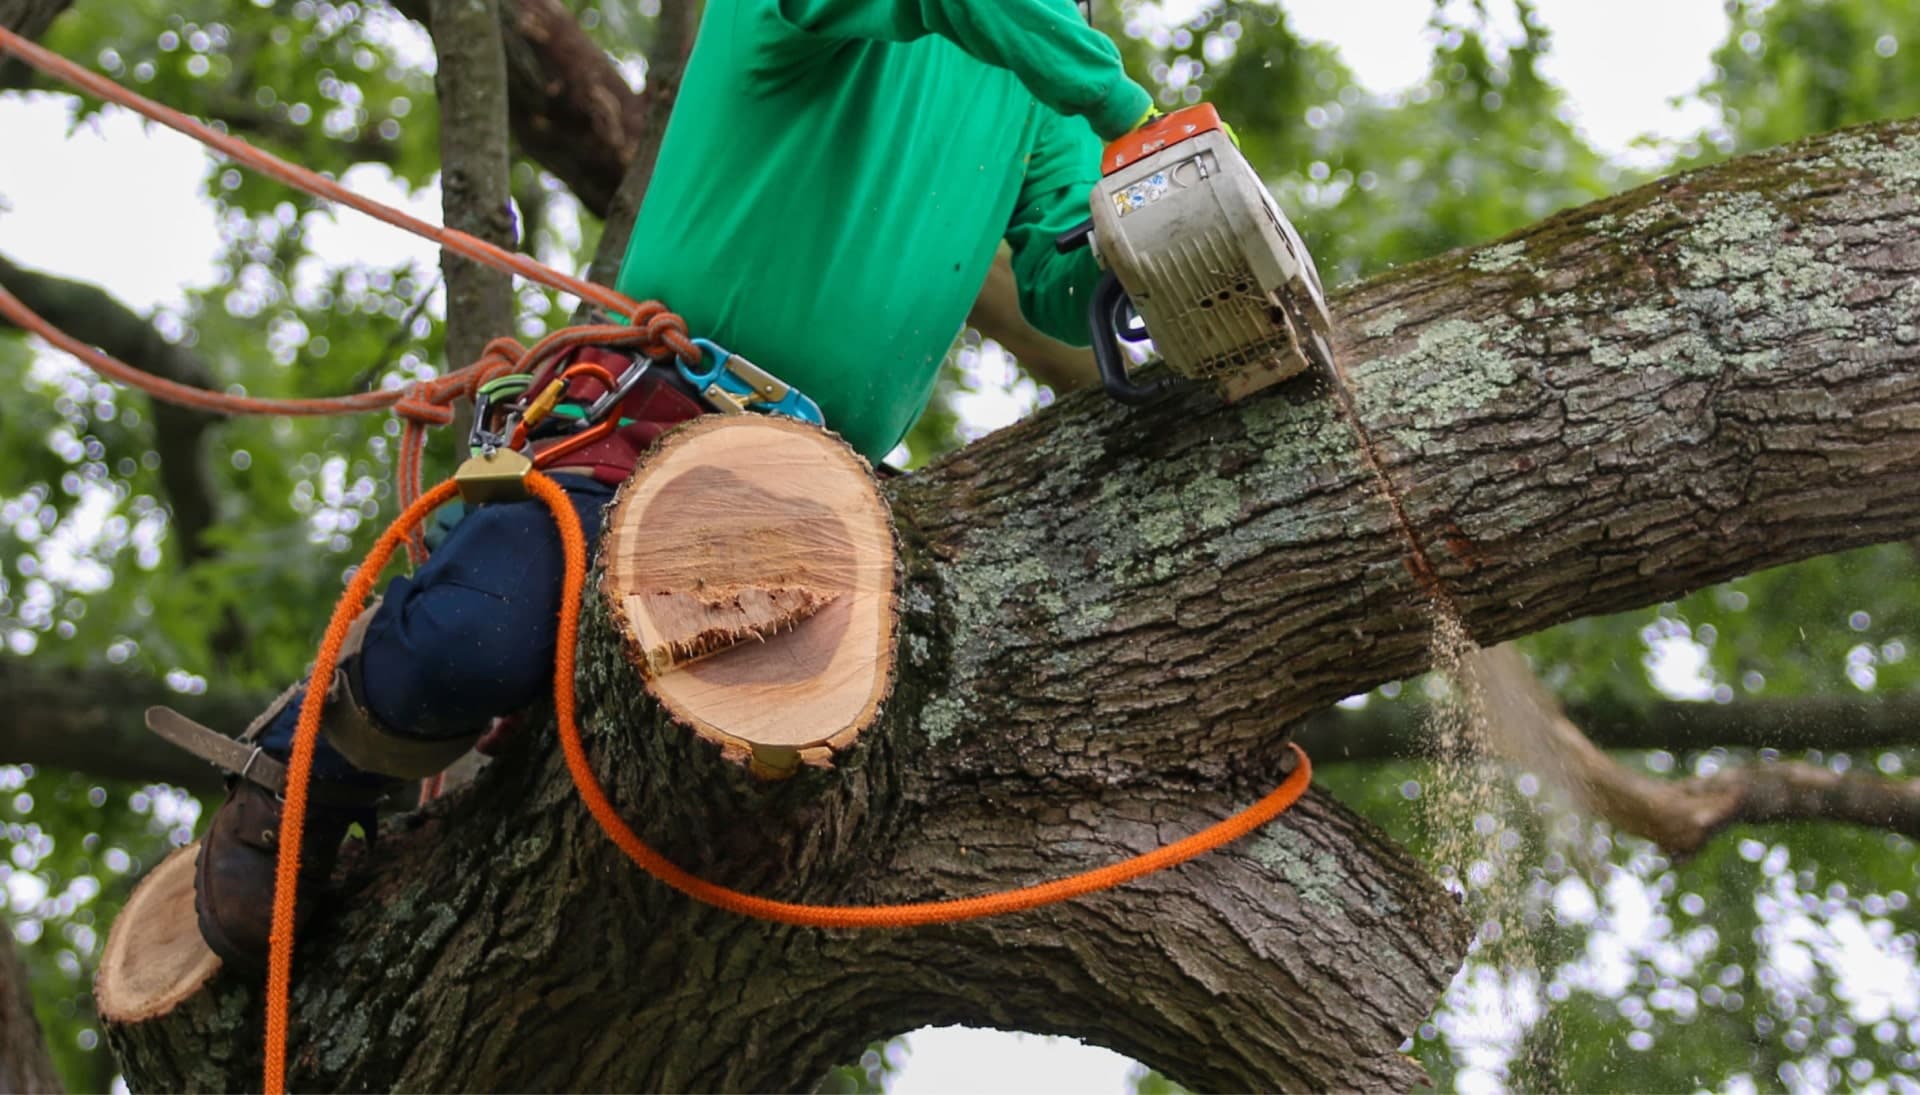 Shed your worries away with best tree removal in Glastonbury